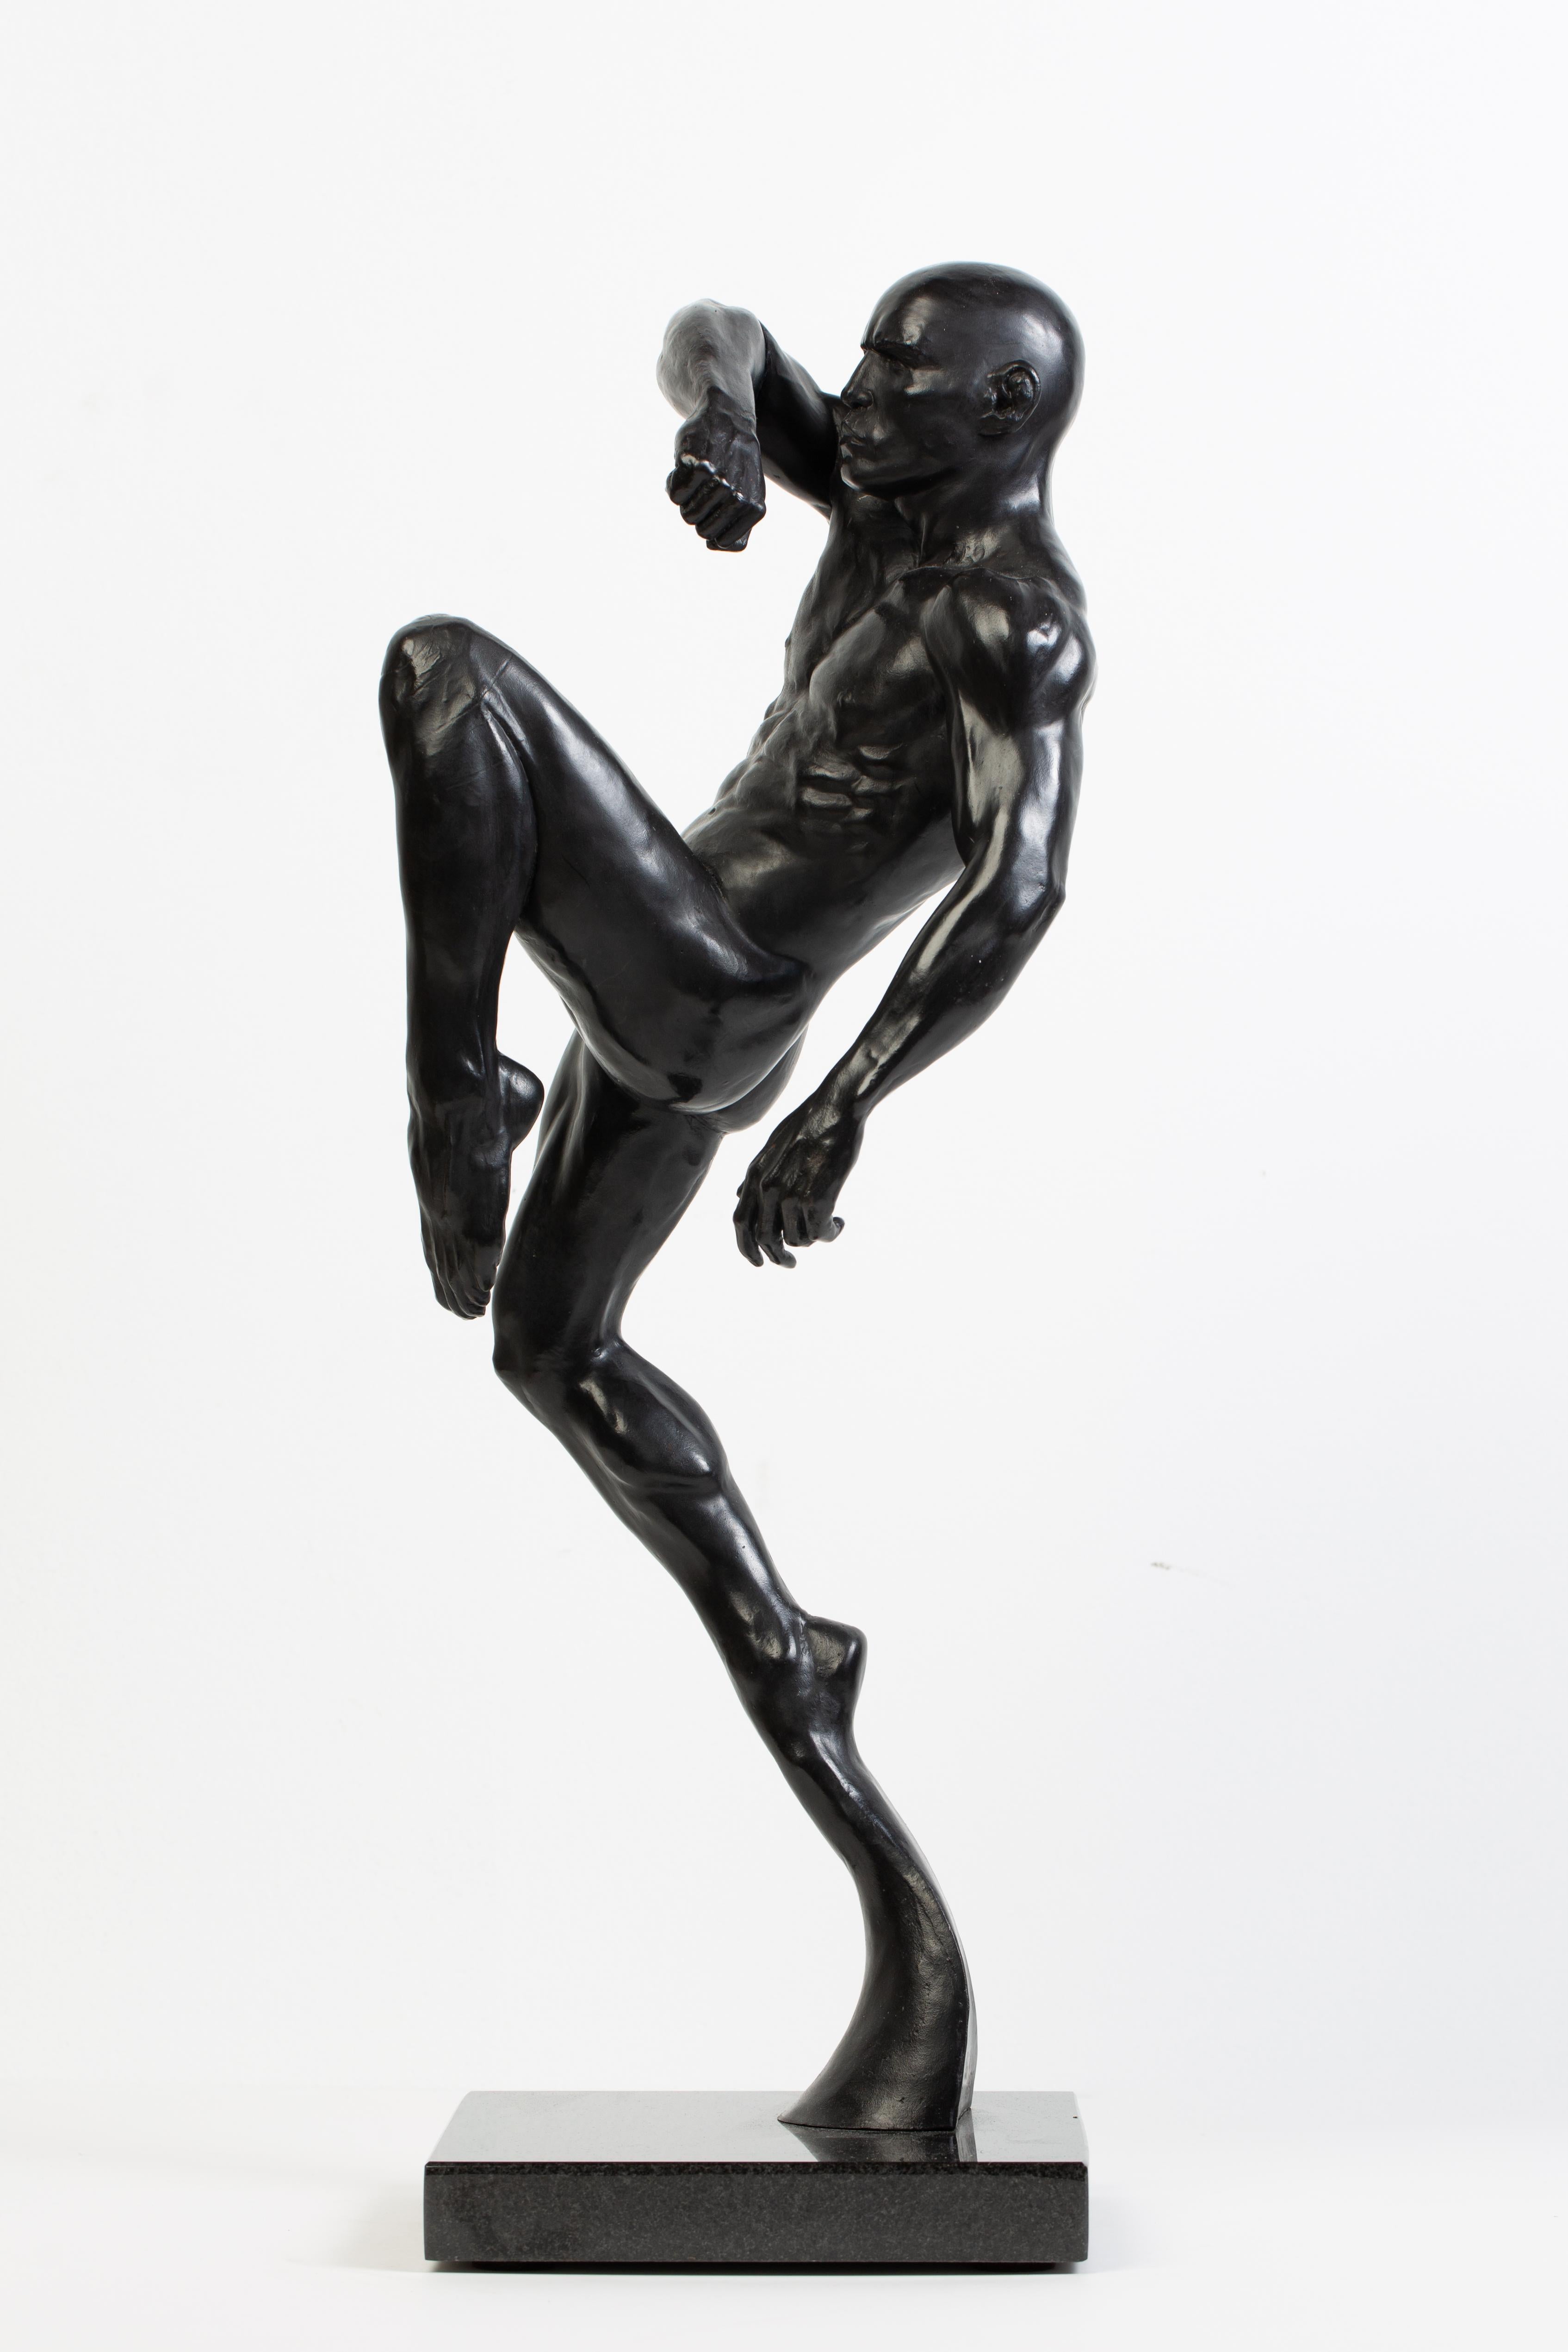 Dean Kugler Nude Sculpture – This Impact - Contemporary Bronze Nude Male Sculpture in Action Pose